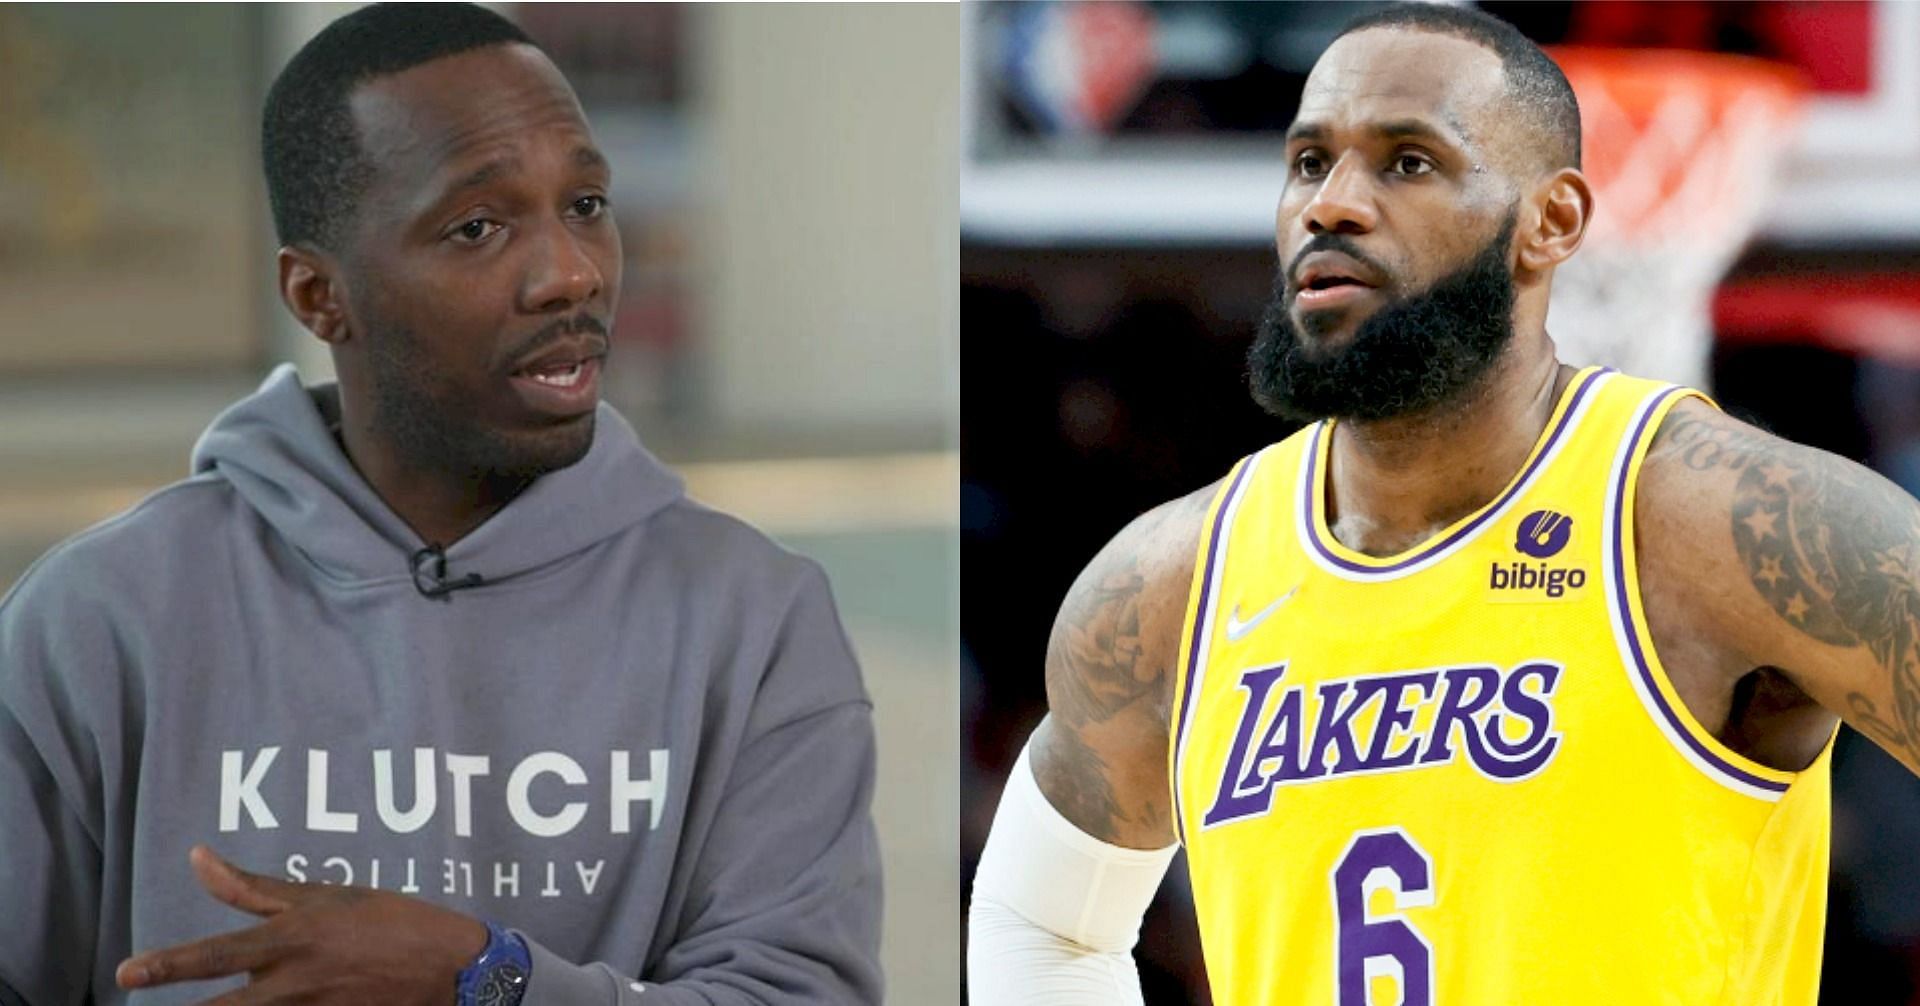 Klutch Sports Group founder Rich Paul and LA Lakers superstar forward LeBron James